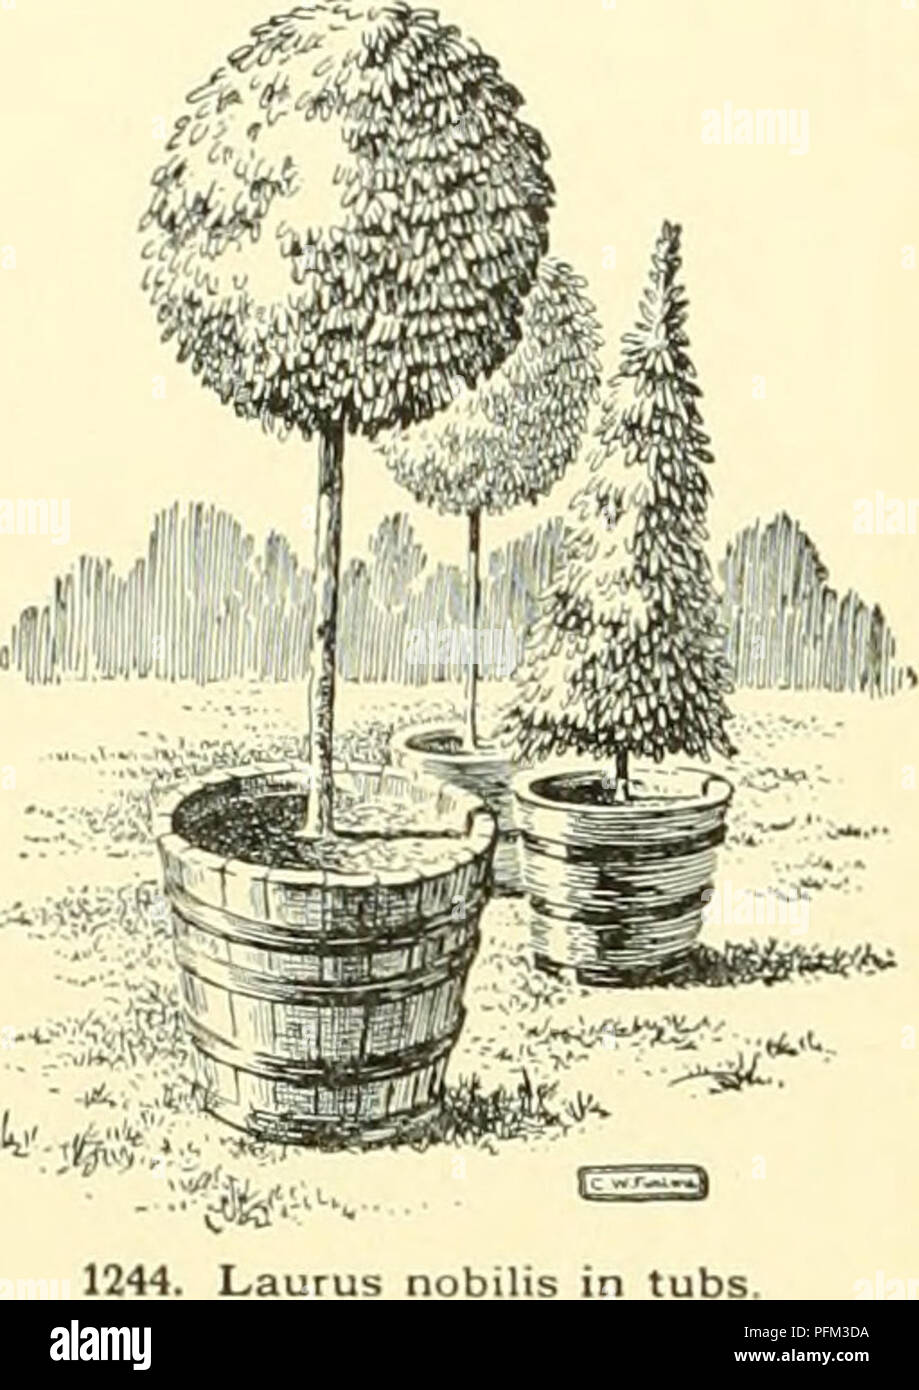 . Cyclopedia of American horticulture, comprising suggestions for cultivation of horticultural plants, descriptions of the species of fruits, vegetables, flowers and ornamental plants sold in the United States and Canada, together with geographical and biographical sketches, and a synopsis of the vegetable kingdom. Gardening -- Dictionaries; Plants -- North America encyclopedias. 890 LAURUS ferred to Laurus, but with the exception of two, these species are now placed in other genera. These two true Lauruses are L. nobilis, Linu. (the subject of this sketch), and L. Canariensis, Webb &amp; Bert Stock Photo